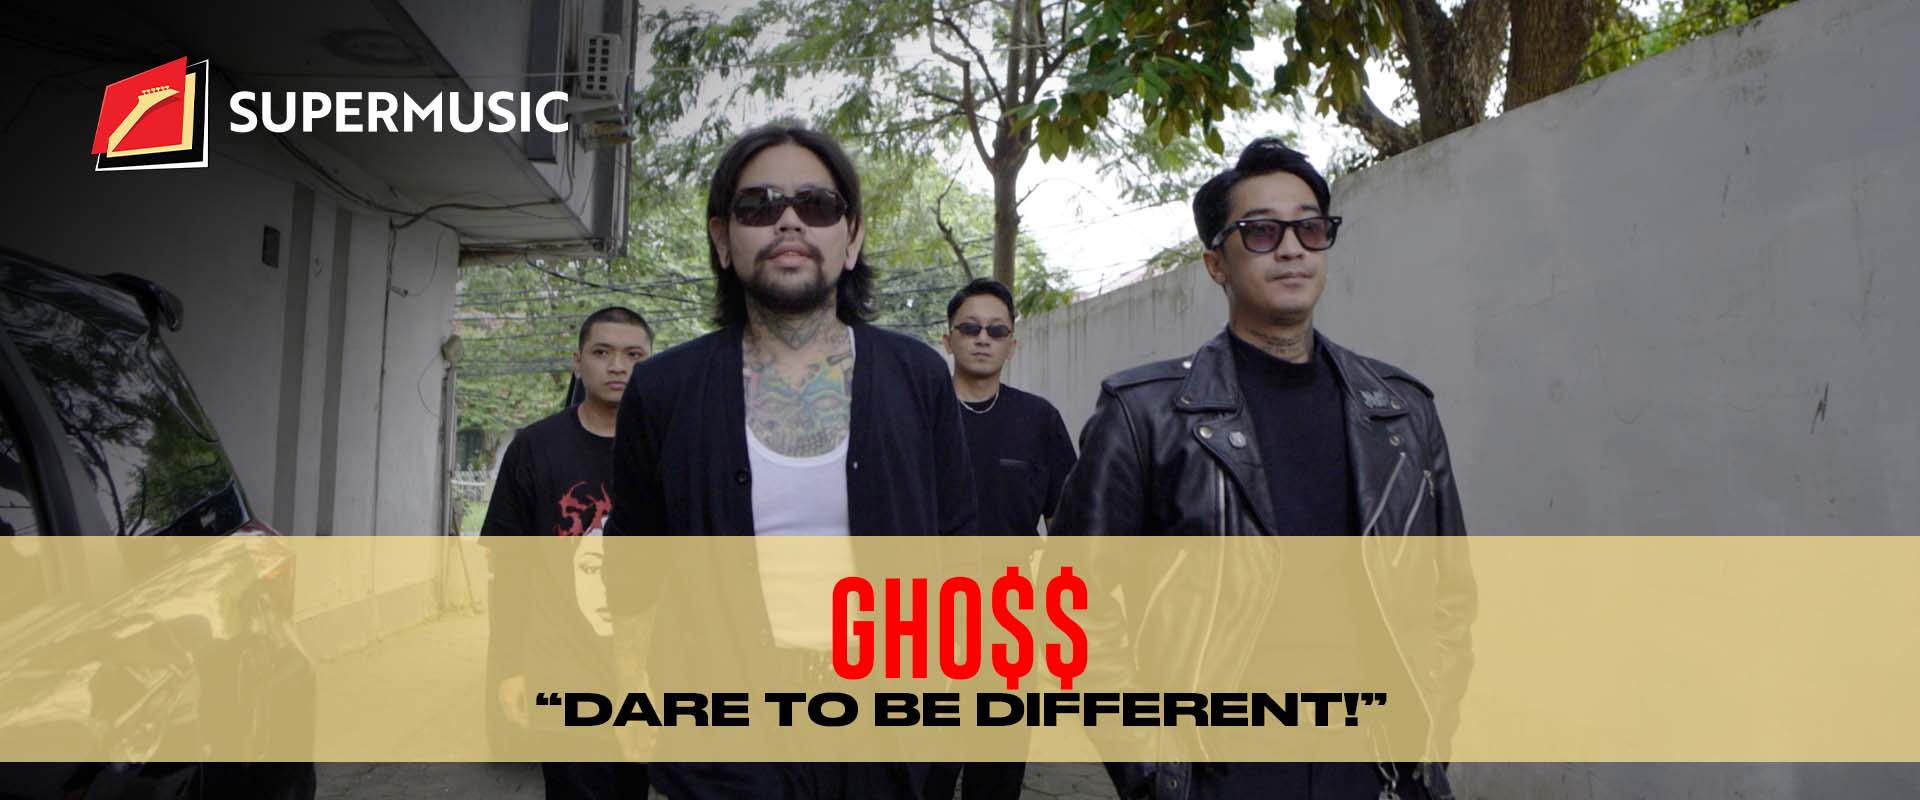 SUPERMUSIC – GHO$$ (Part 1) “Dare To Be Different!”